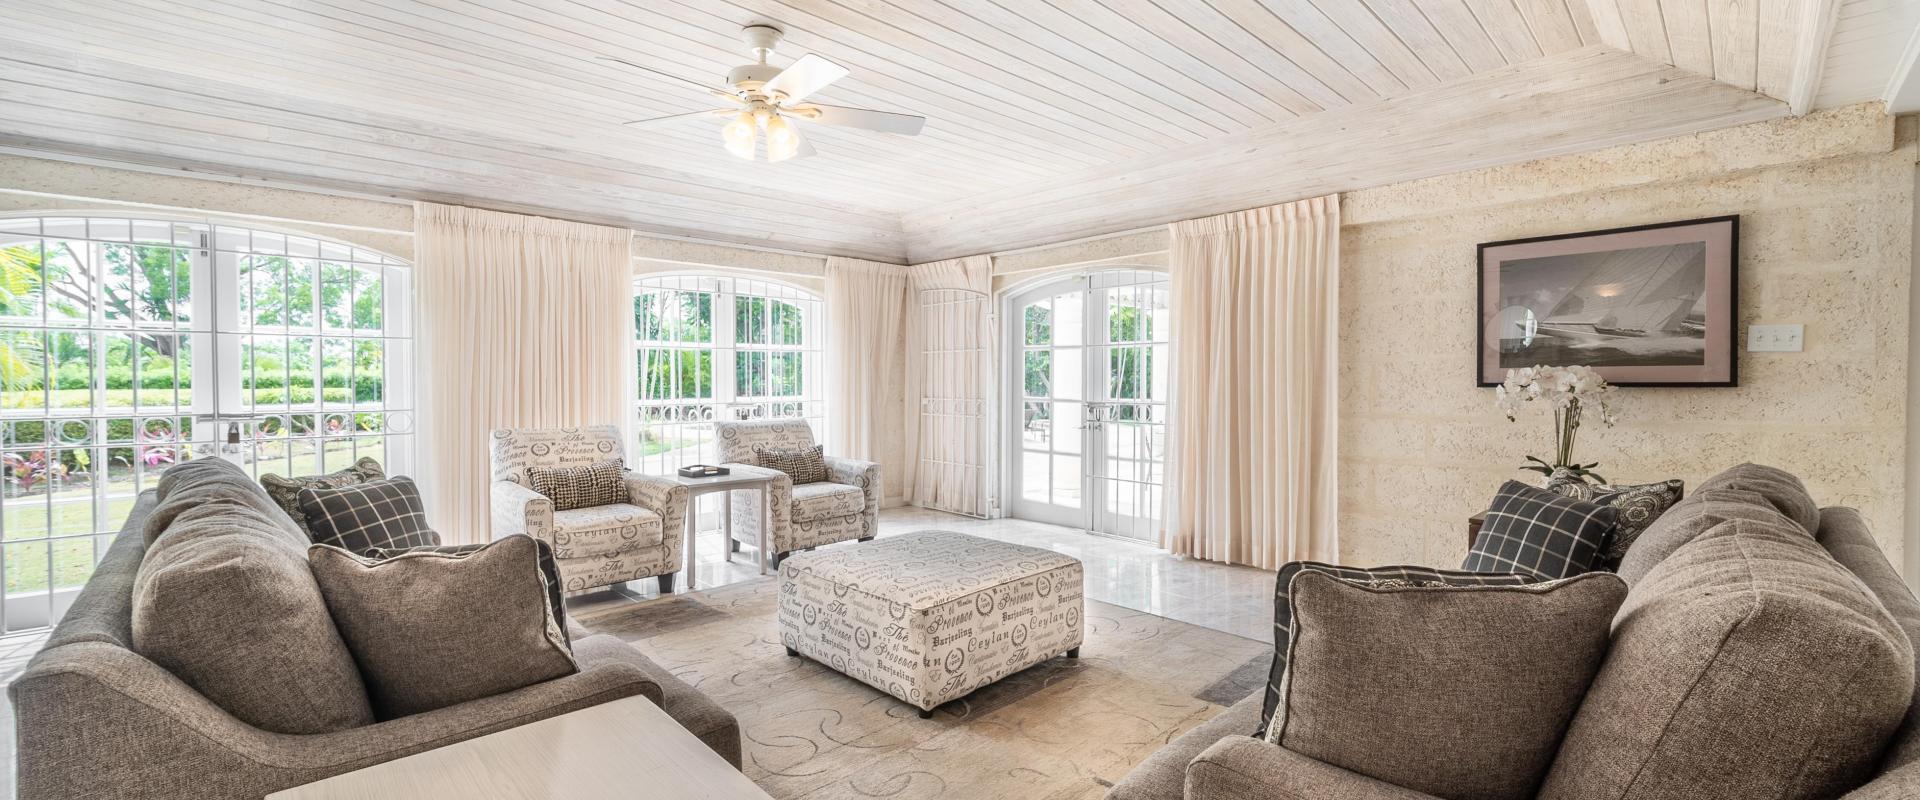 Franklins House Holiday Rental Villa In Sandy Lane Barbados Living Room With Deck View